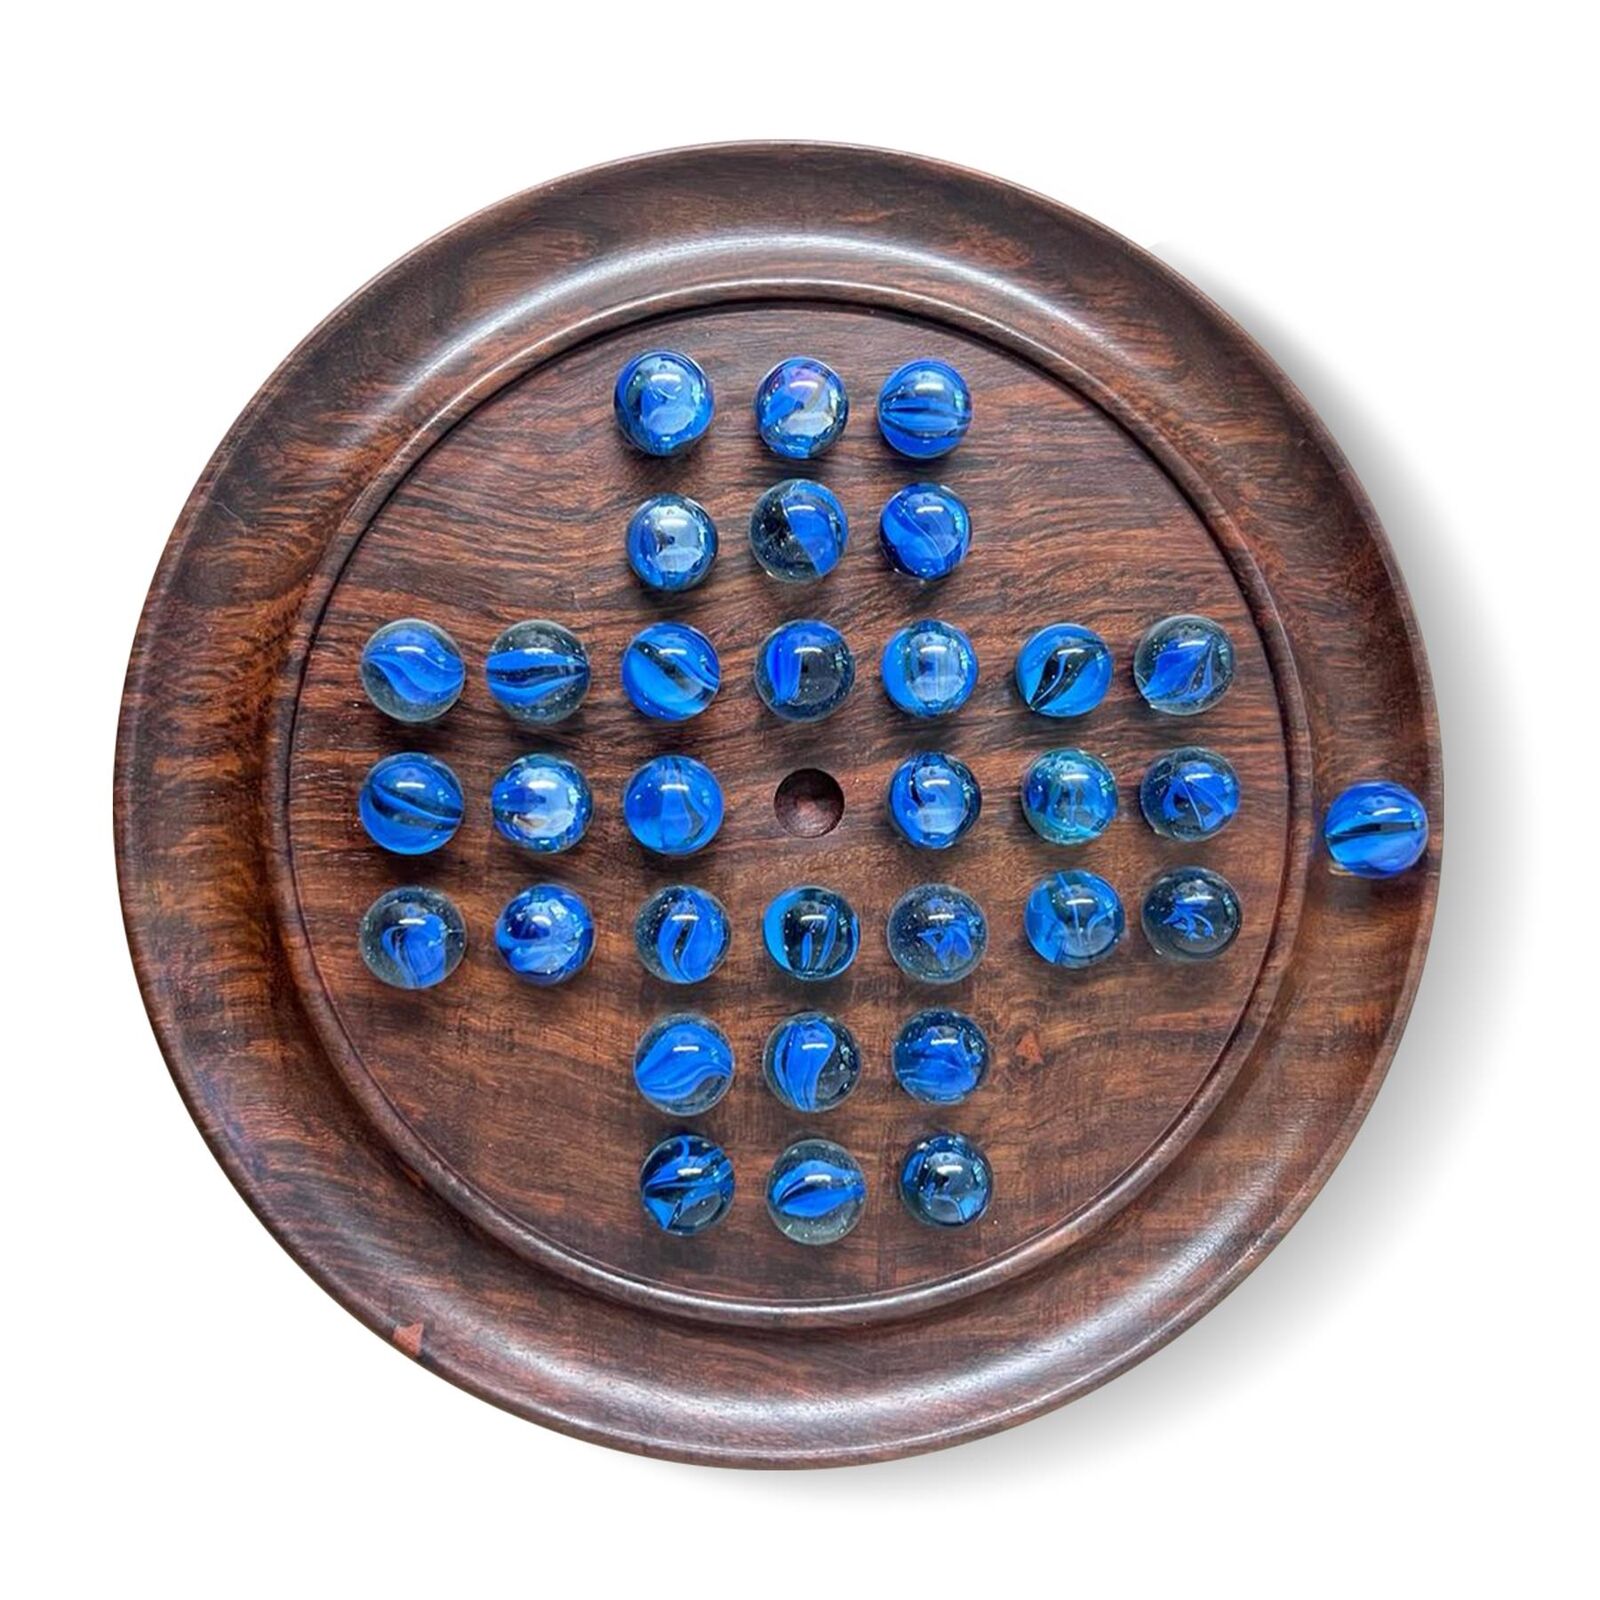 A wooden solitaire board with blue marbles arranged in the starting pattern, with the center space empty, isolated on a white background.